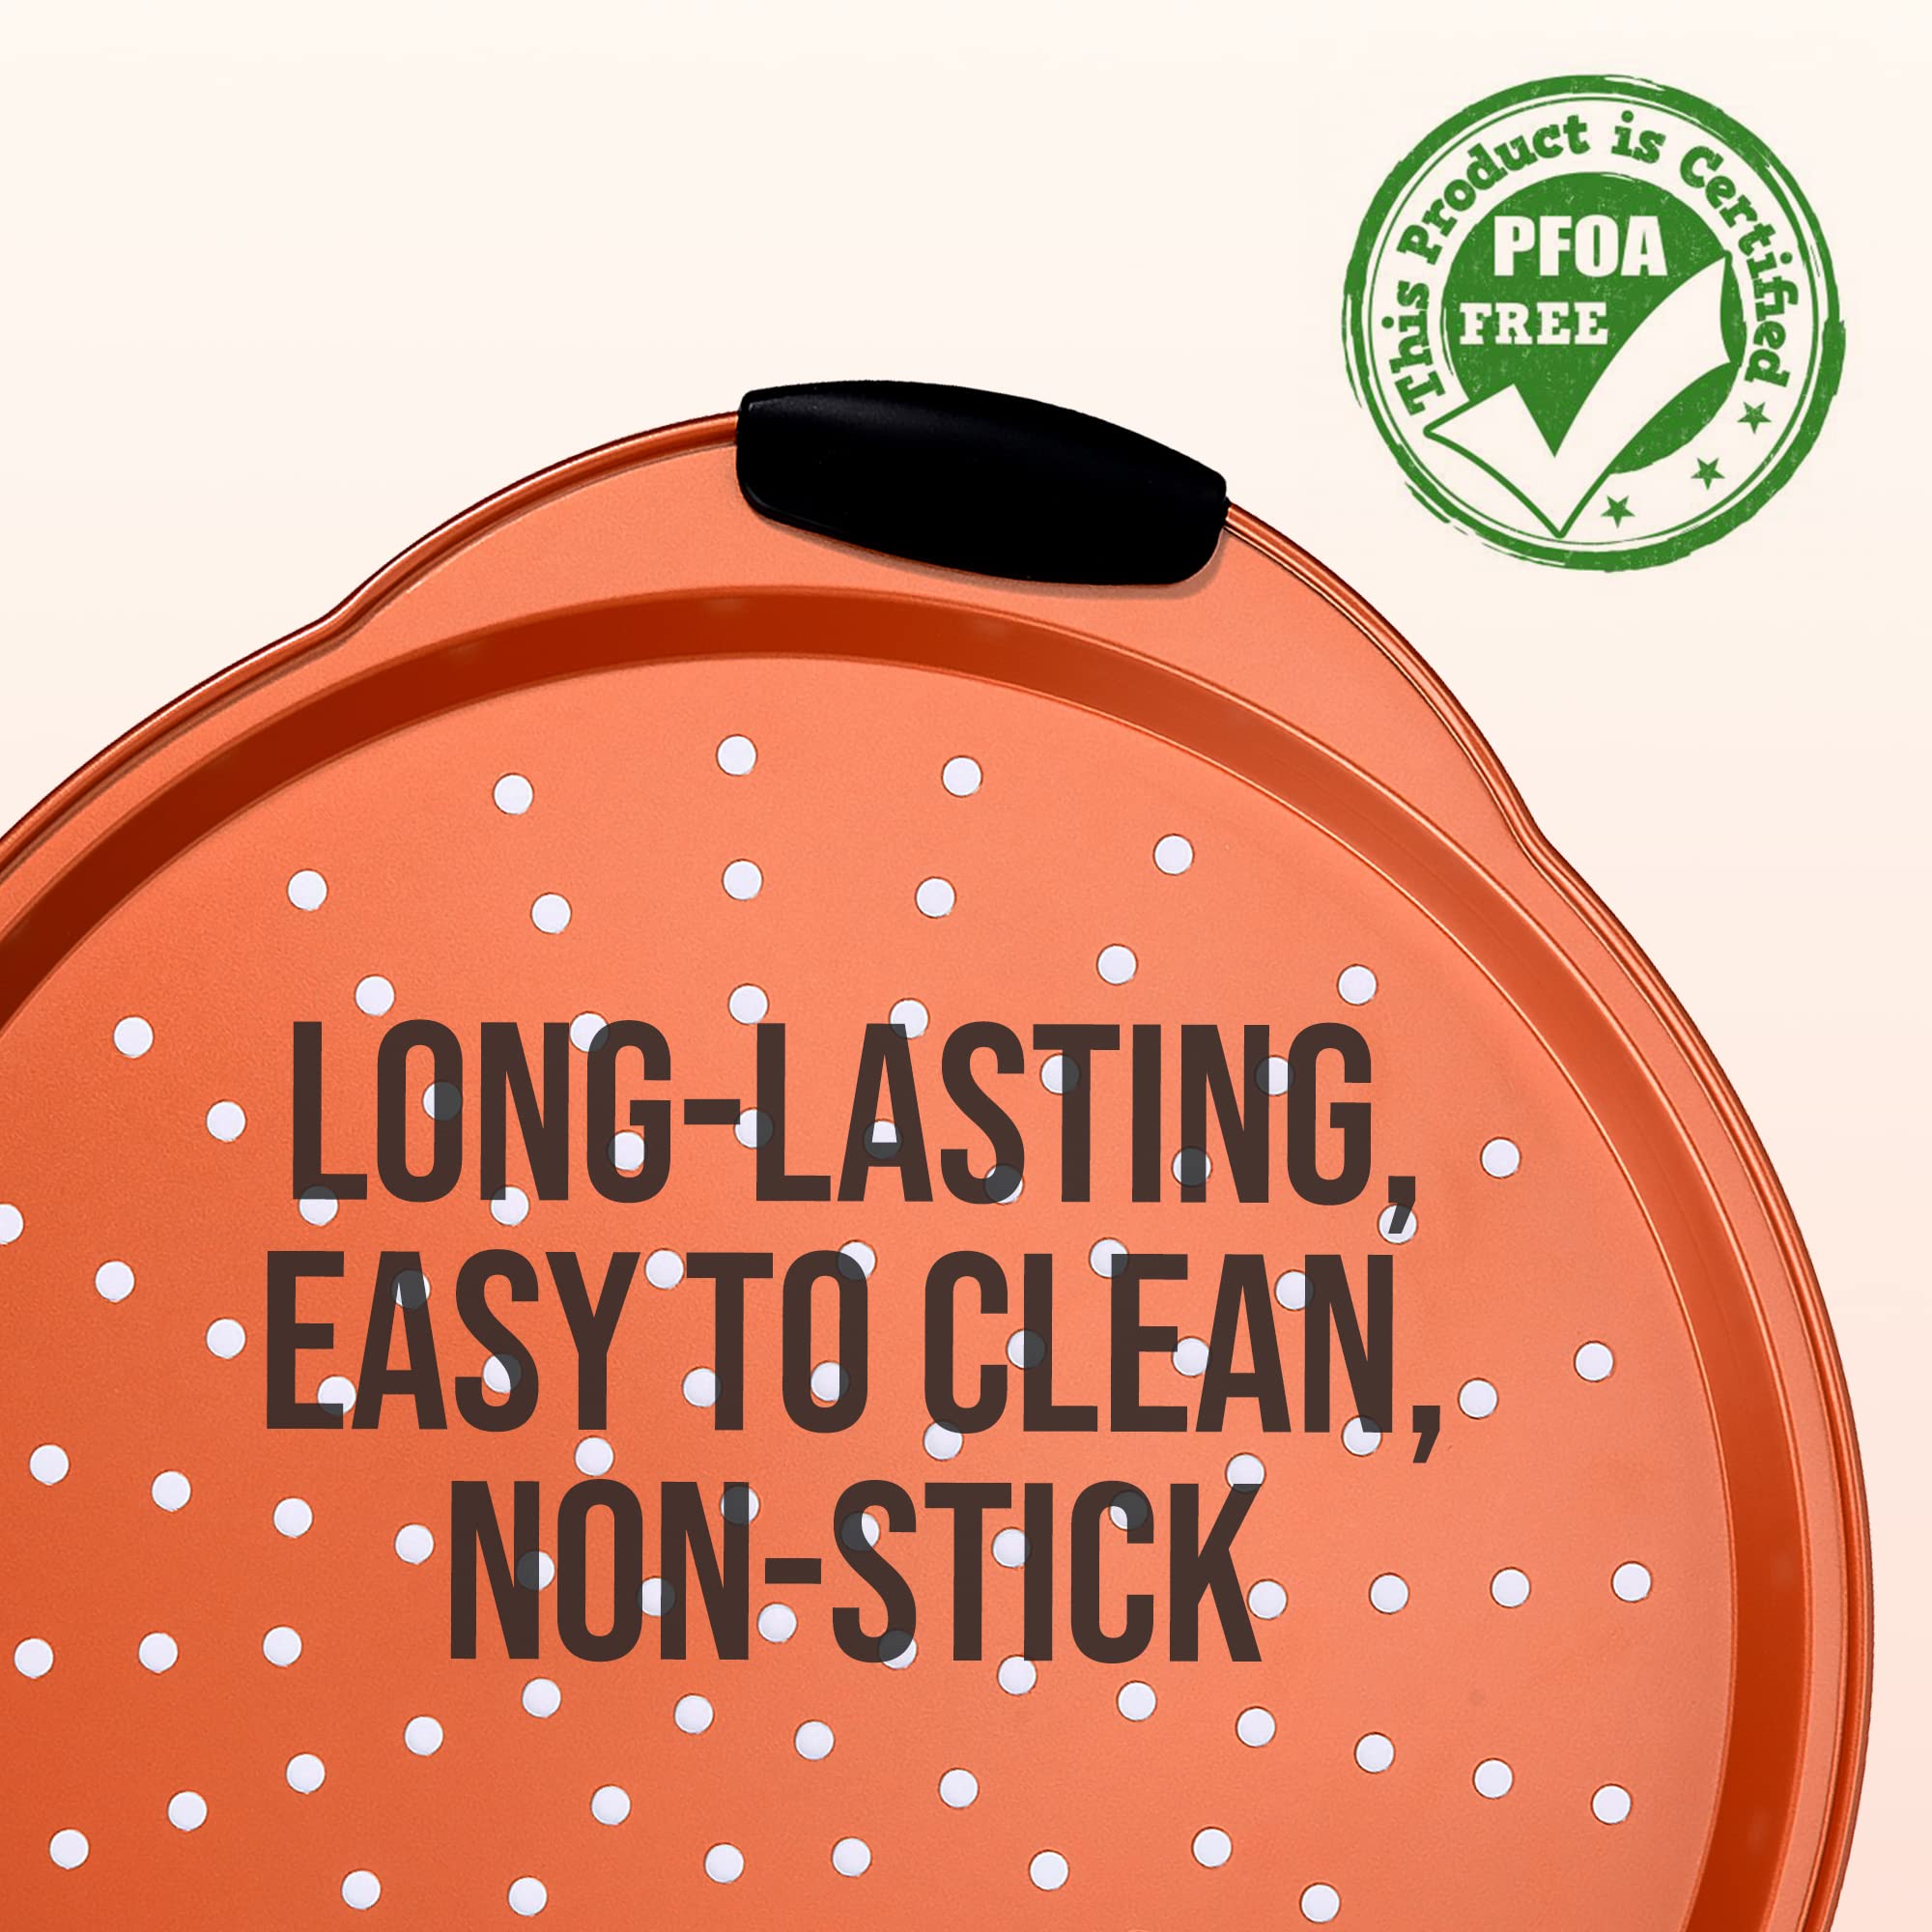 NutriChef Non-Stick Pizza Tray - with Silicone Handle, Round Steel Non-stick Pan with Perforated Holes, Premium Bakeware, Pizza Tray with Silicone and Oversized Handle, Dishwasher Safe - NCBPIZ4